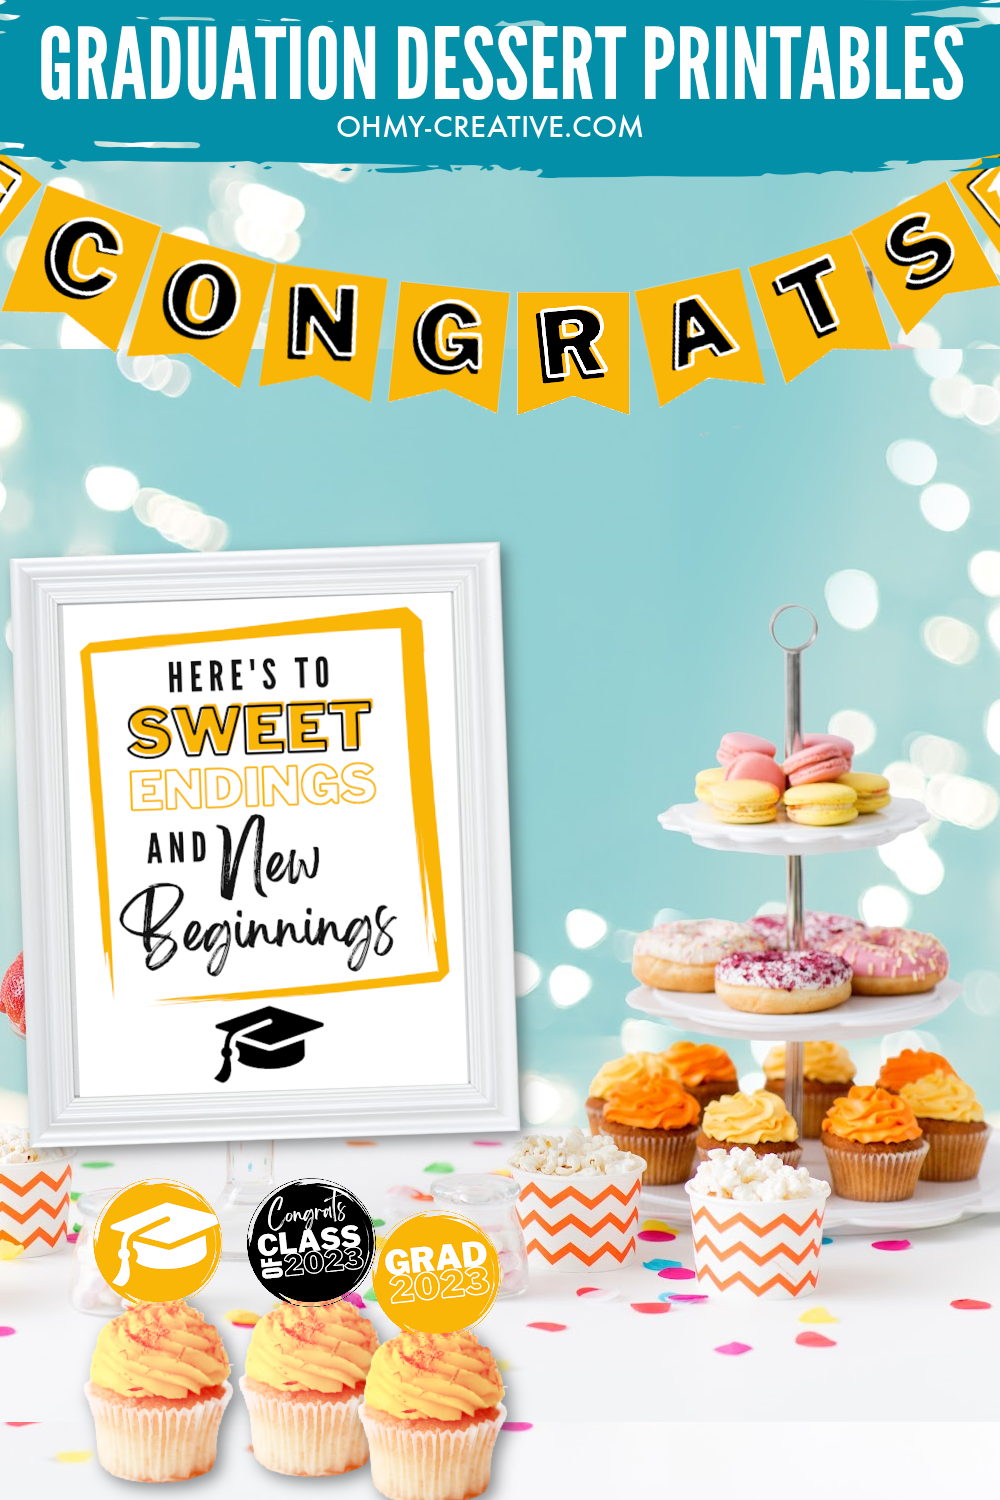 Graduation party dessert table with a printable "Here's to sweet endings and New beginnings" sign, printable cupcake toppers on cupcakes and a tiered tray with donuts and cupcakes on it. 